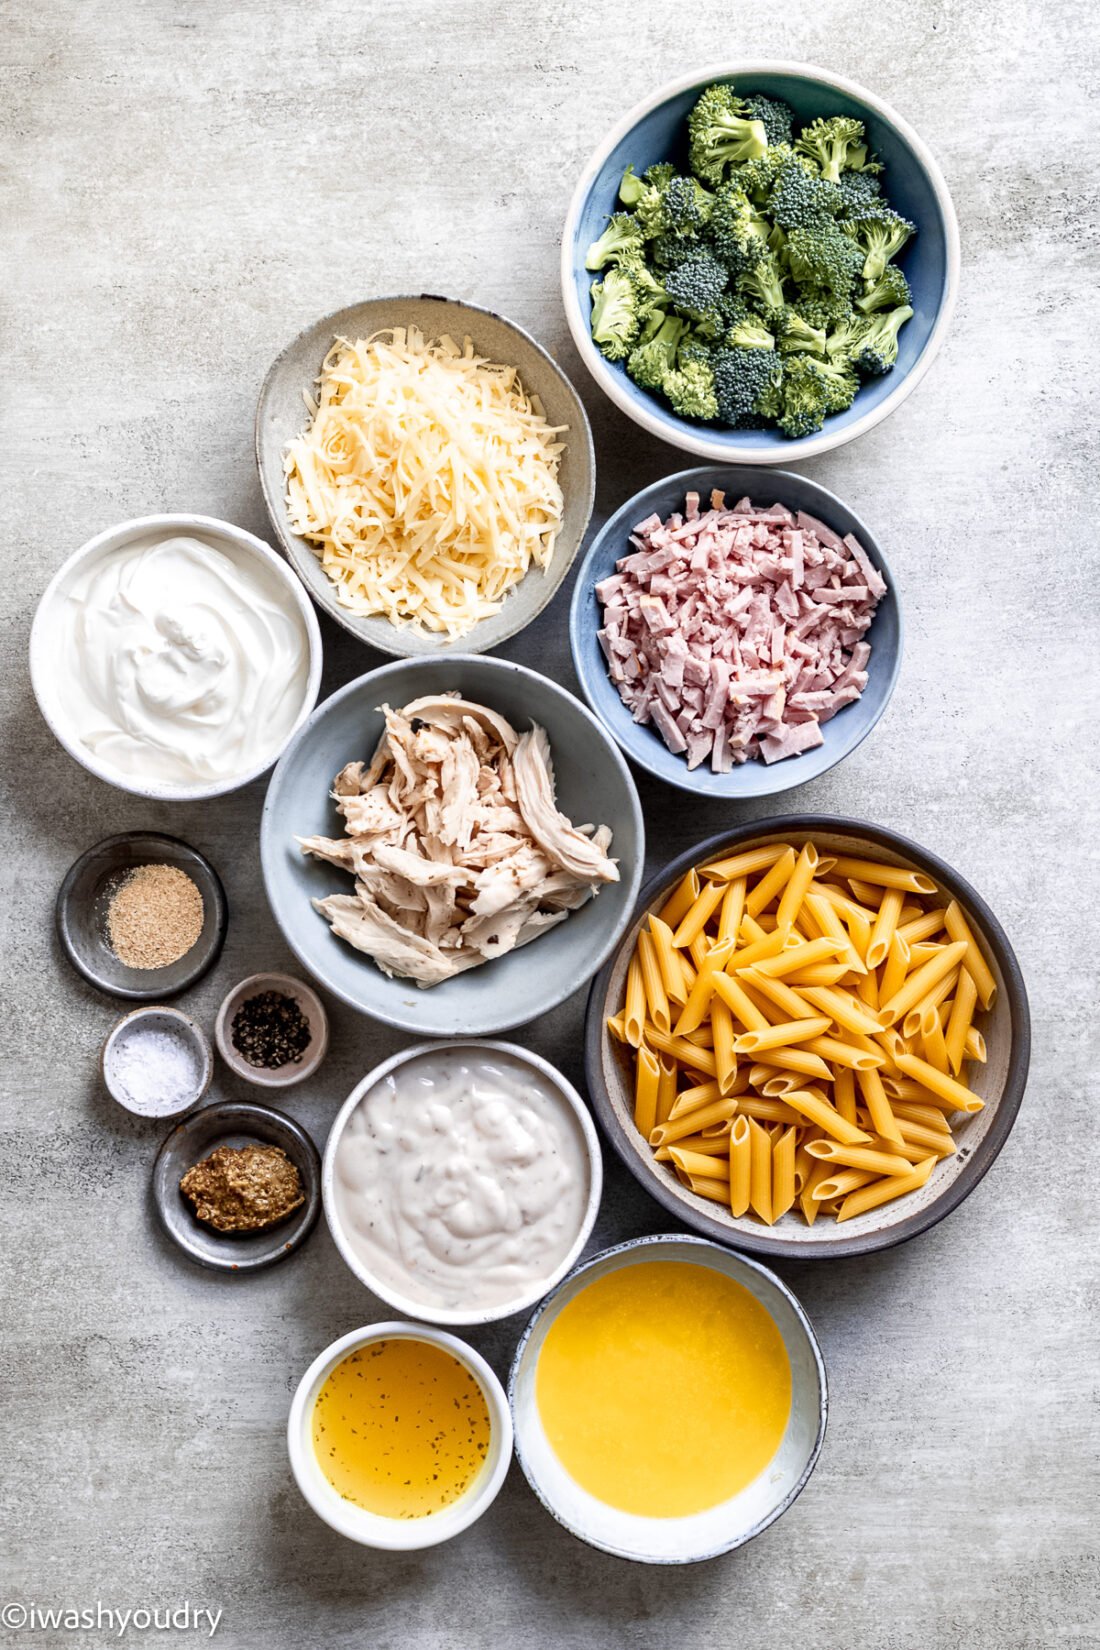 Ingredients for chicken cordon bleu in bowls on marble background